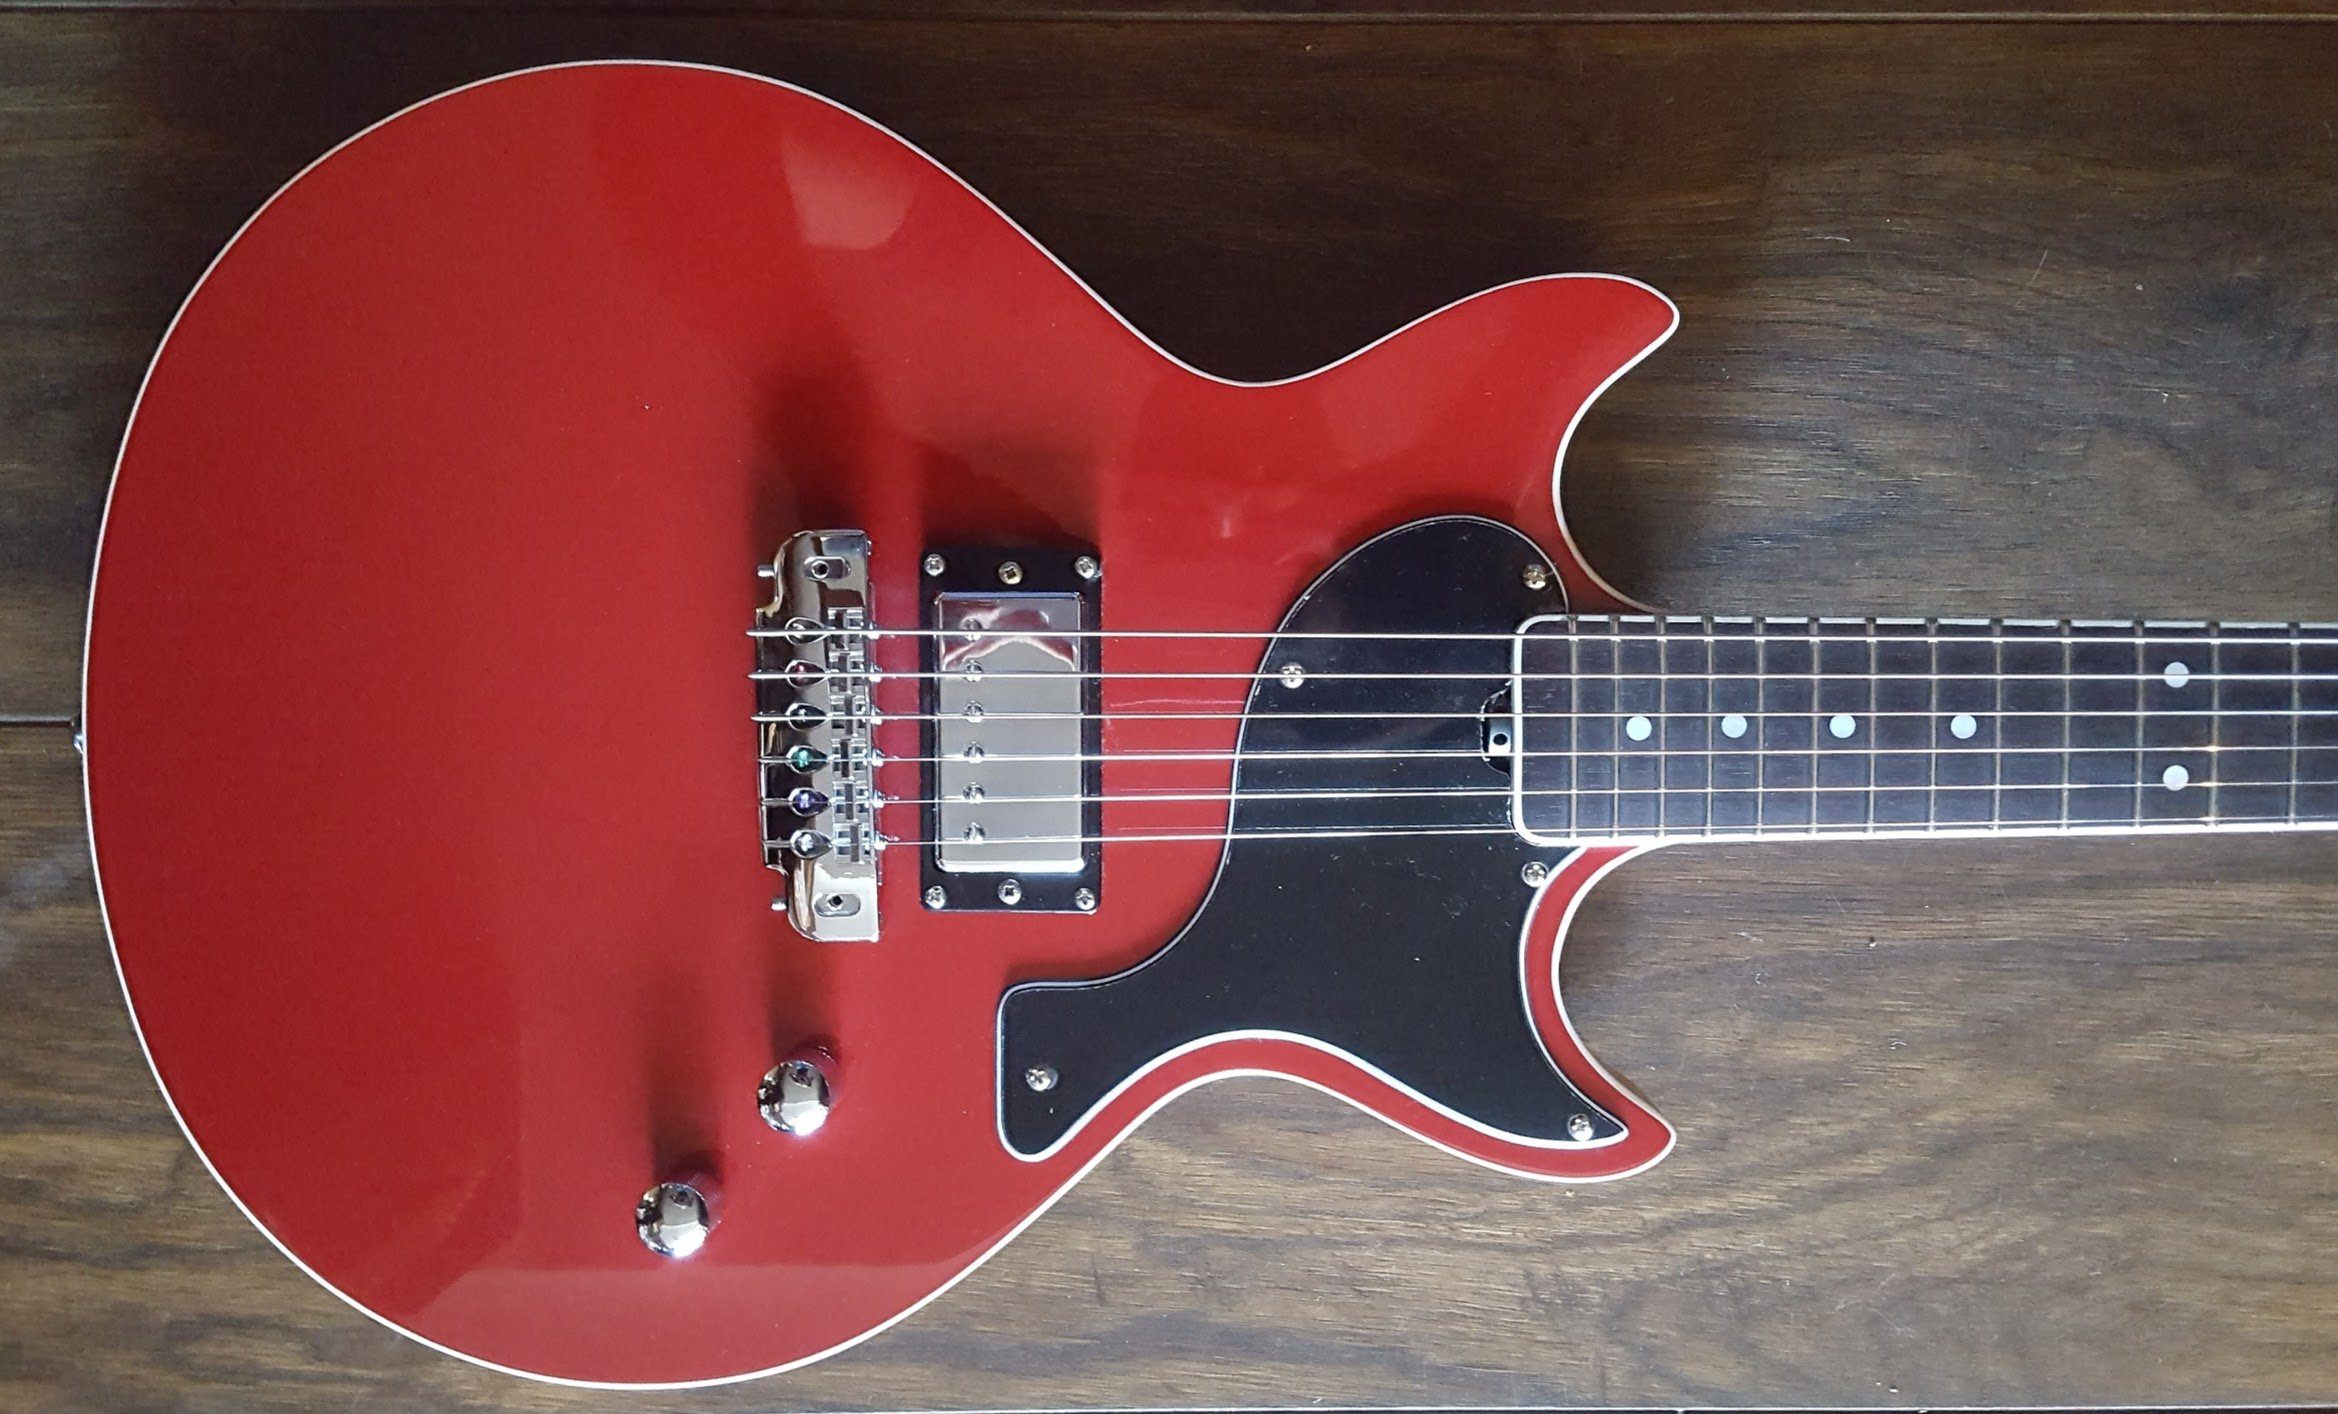 Gordon Smith GS1000 Red, Electric Guitar for sale at Richards Guitars.